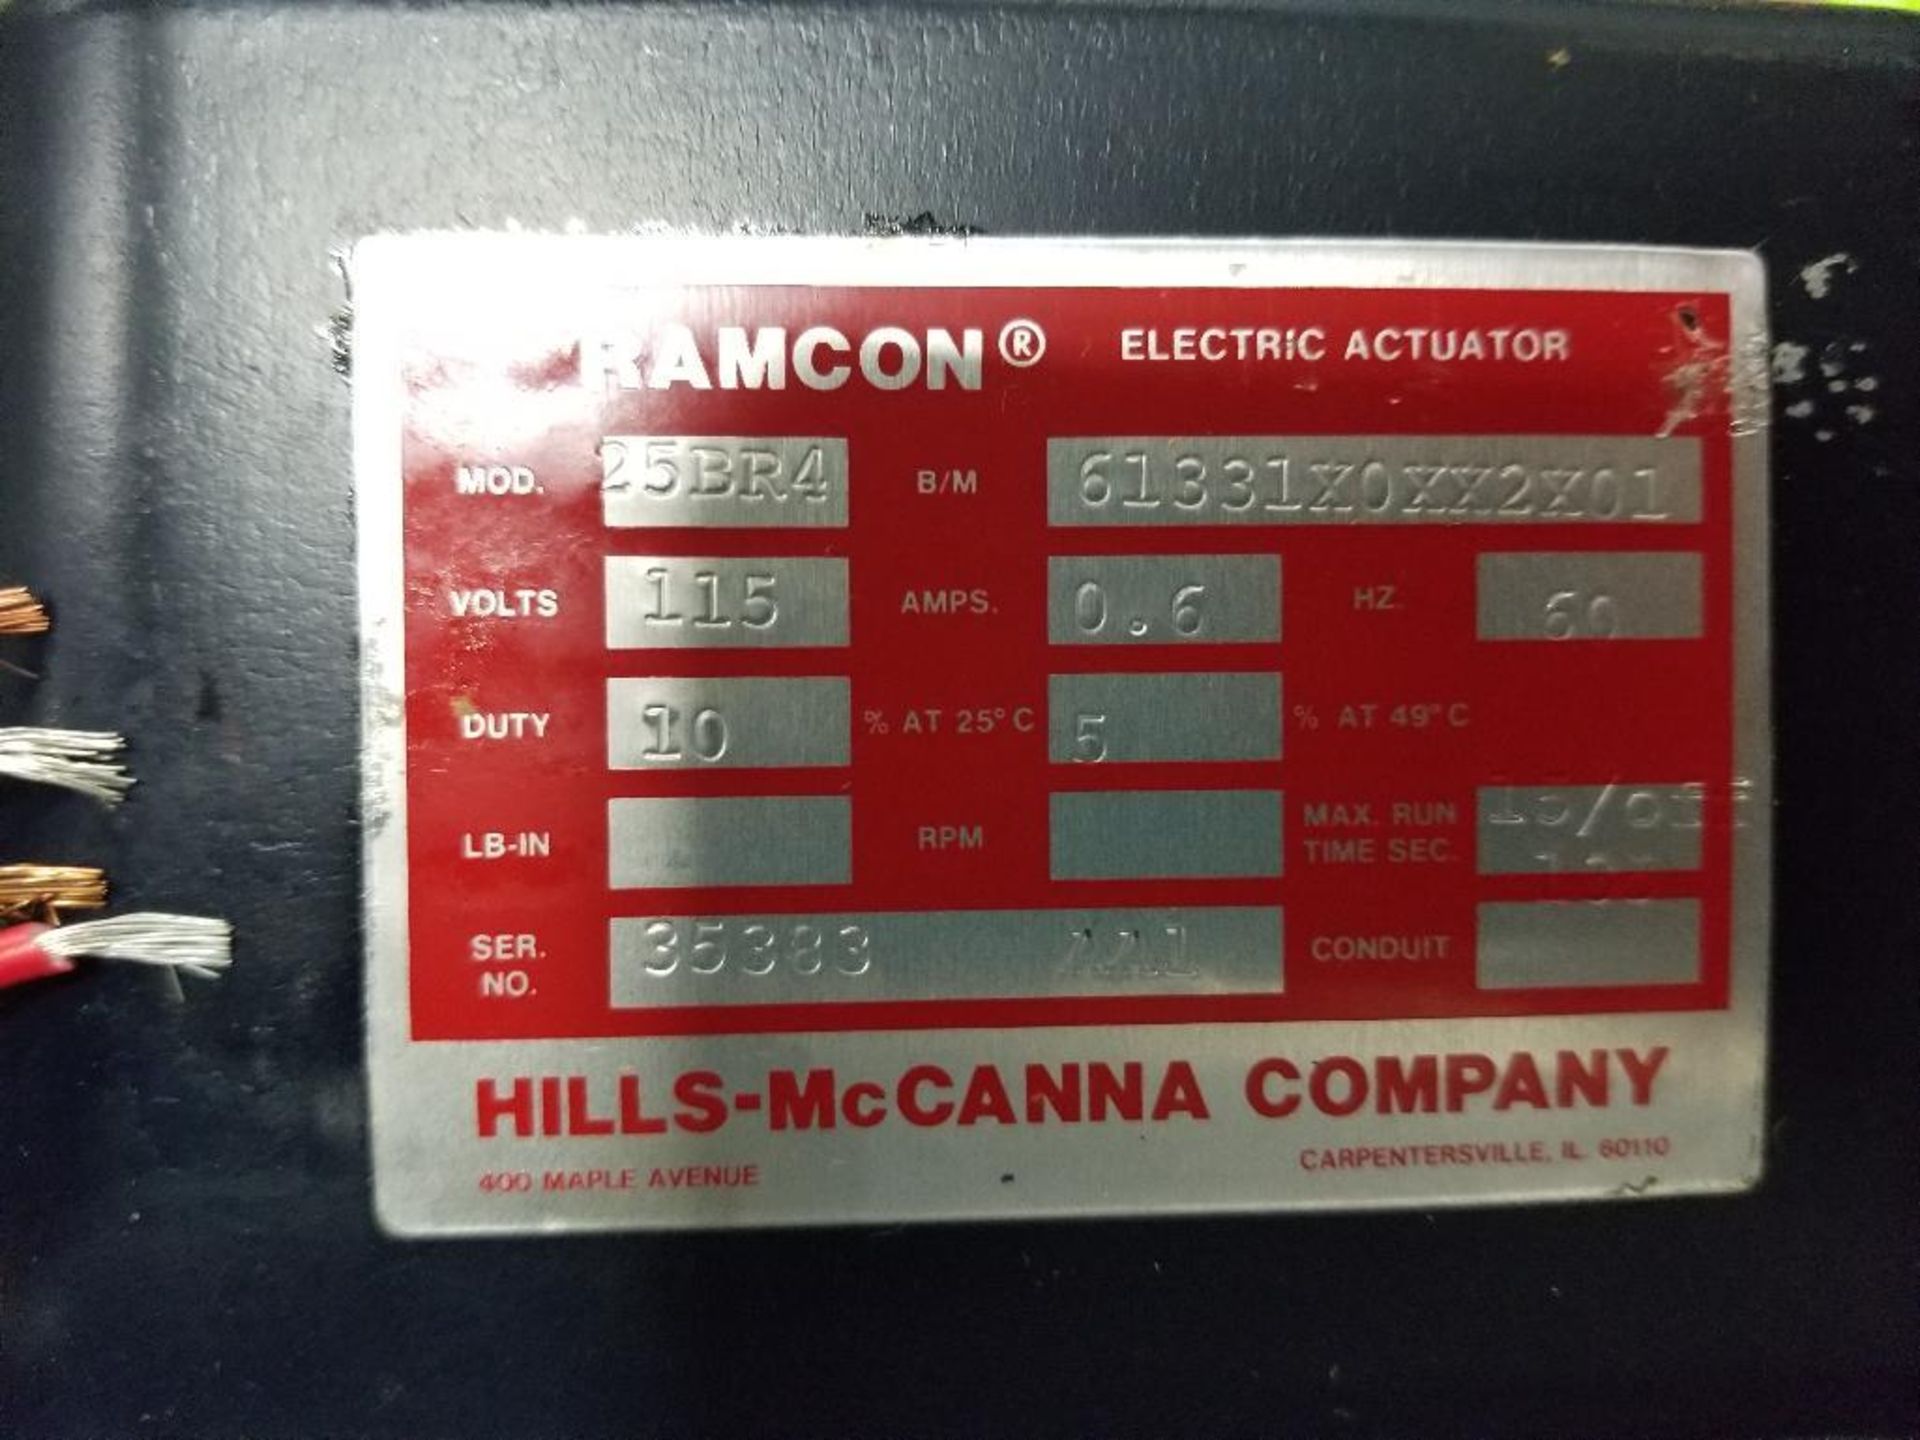 Qty 4 - Ramcon electric actuator. Model 25BR4. New in box. - Image 3 of 4